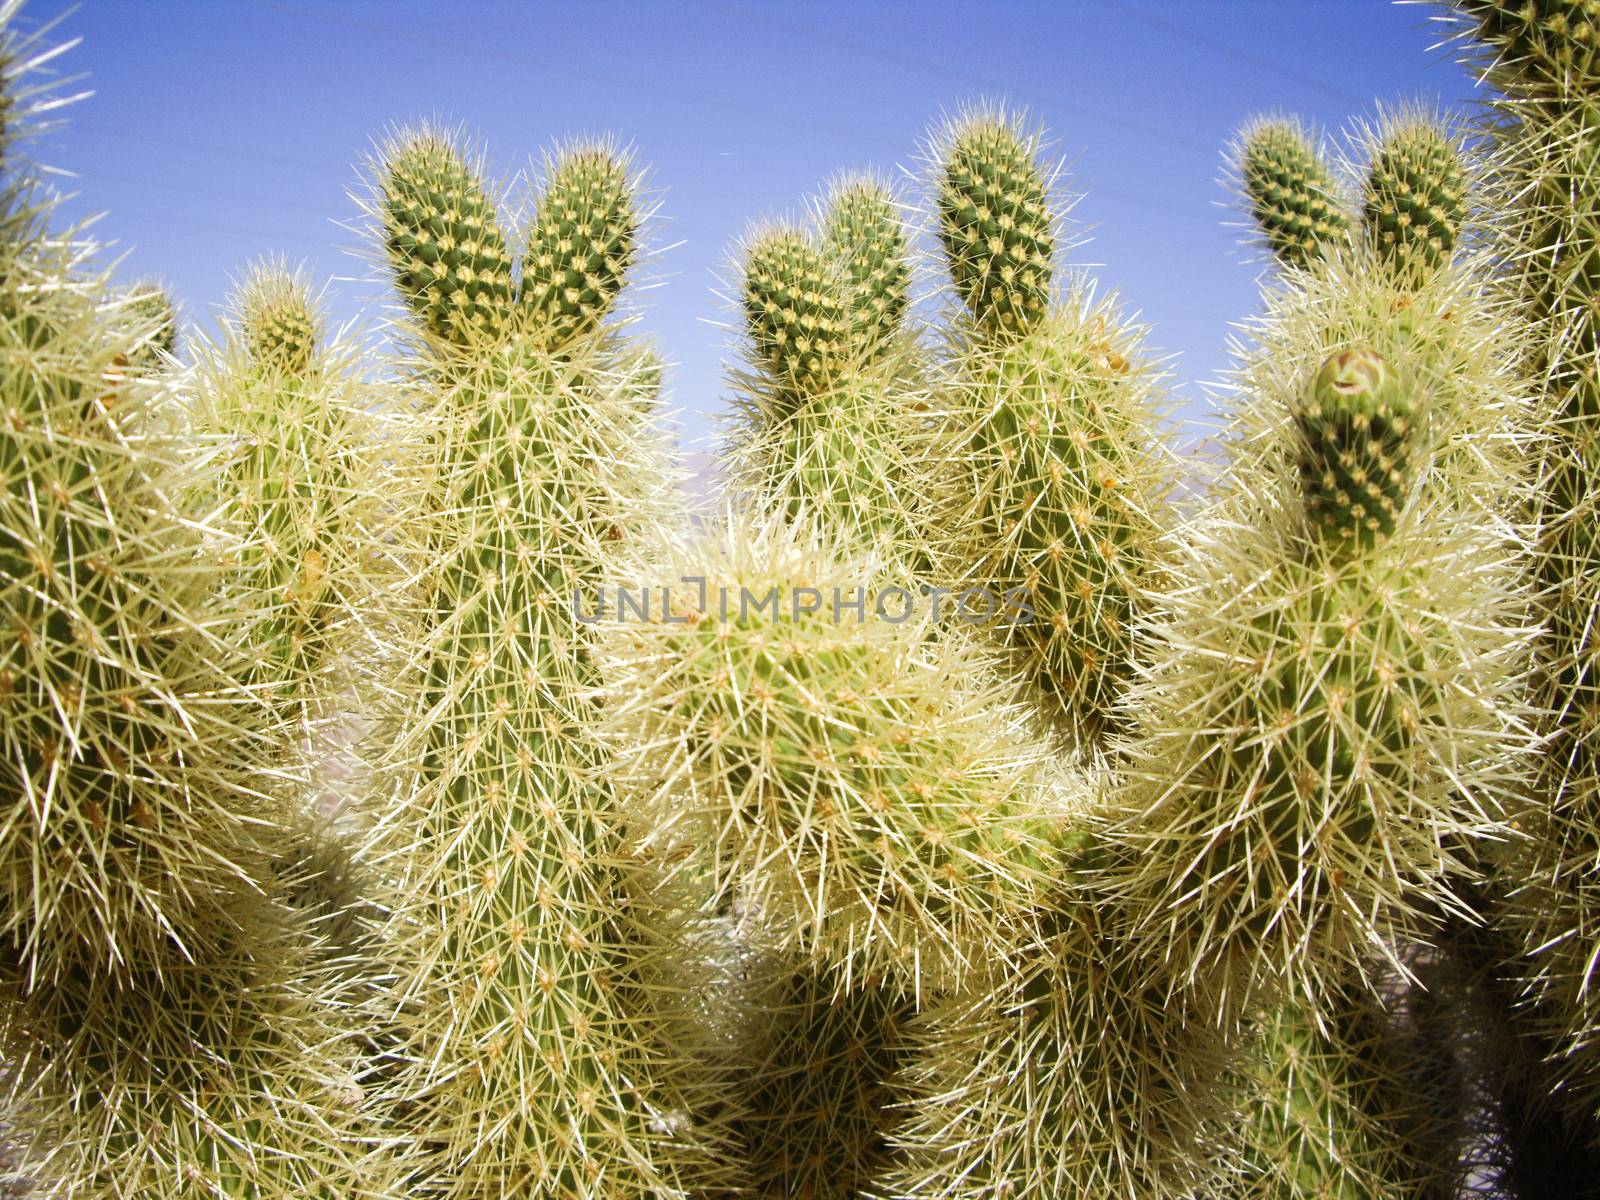 Green cactus with many spines